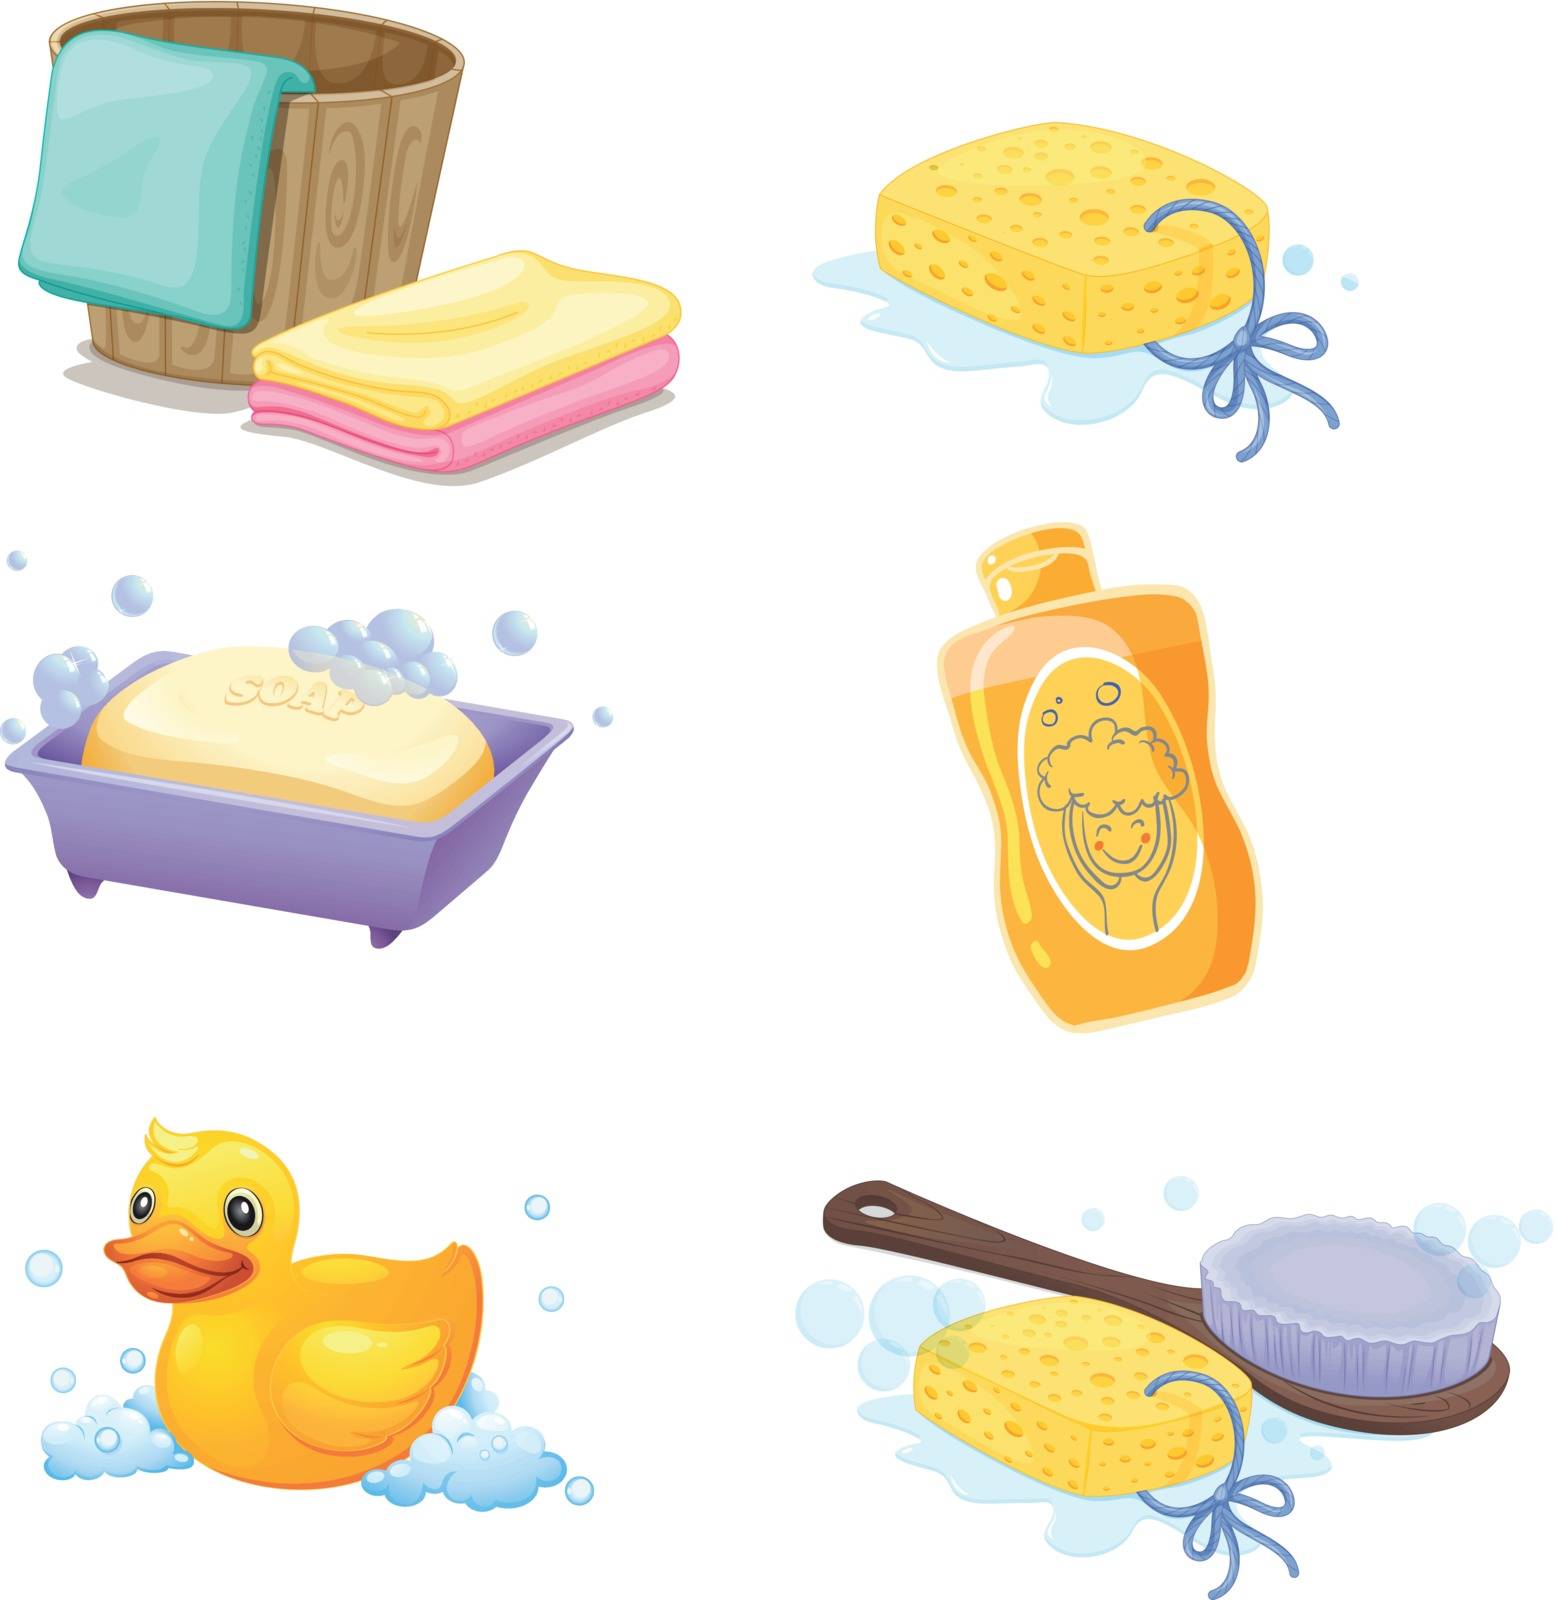 Illustration of the bathroom accessories on a white background